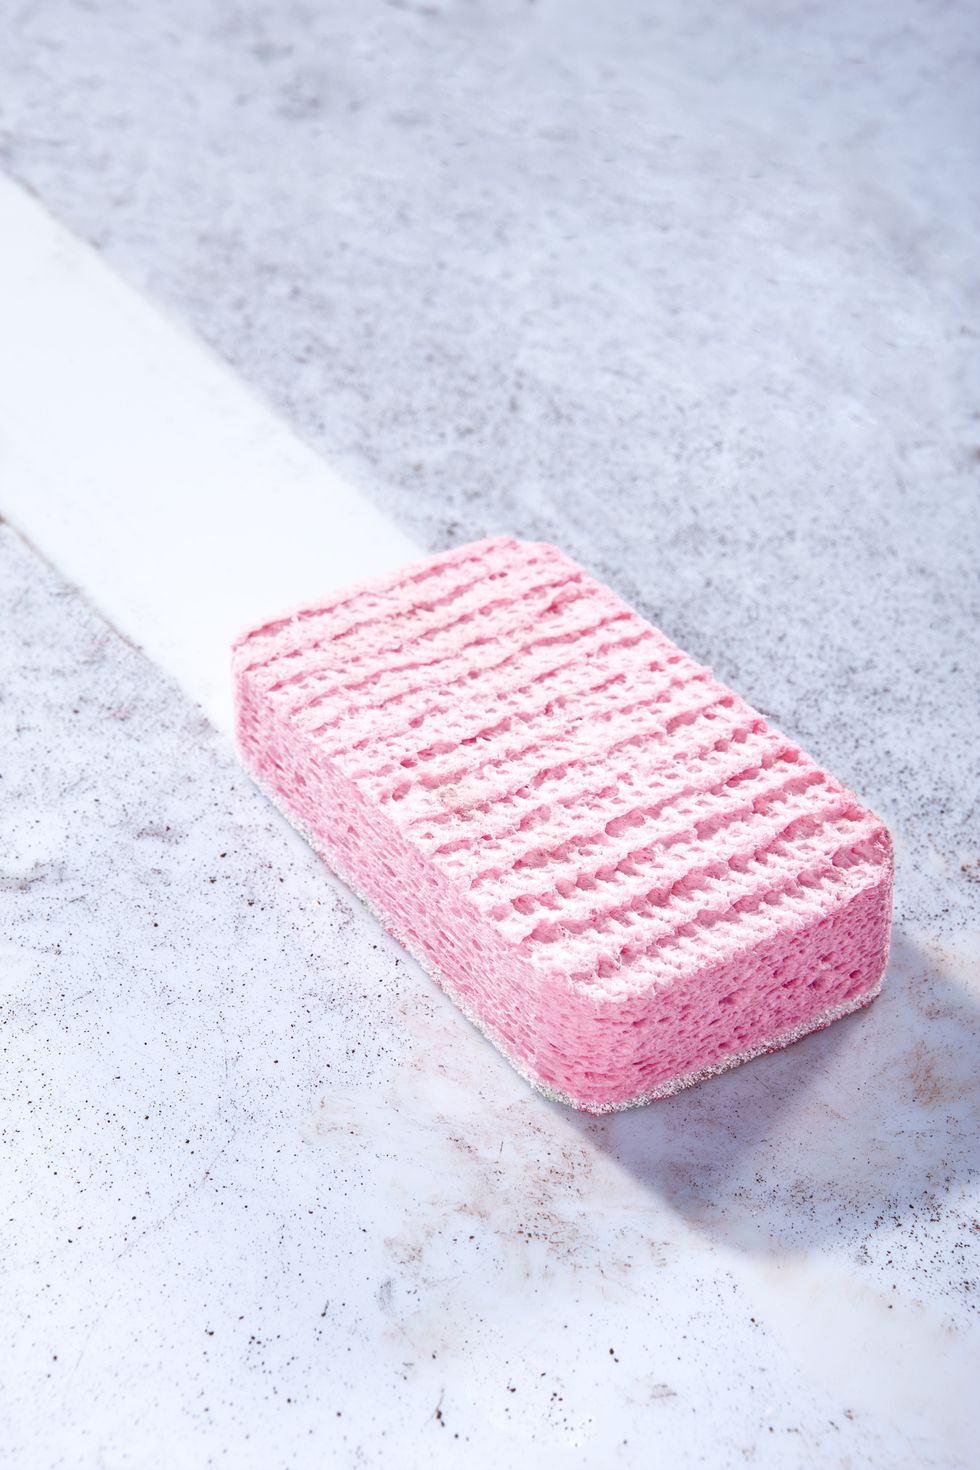 Ultra Soft Screen Cleaning Brush